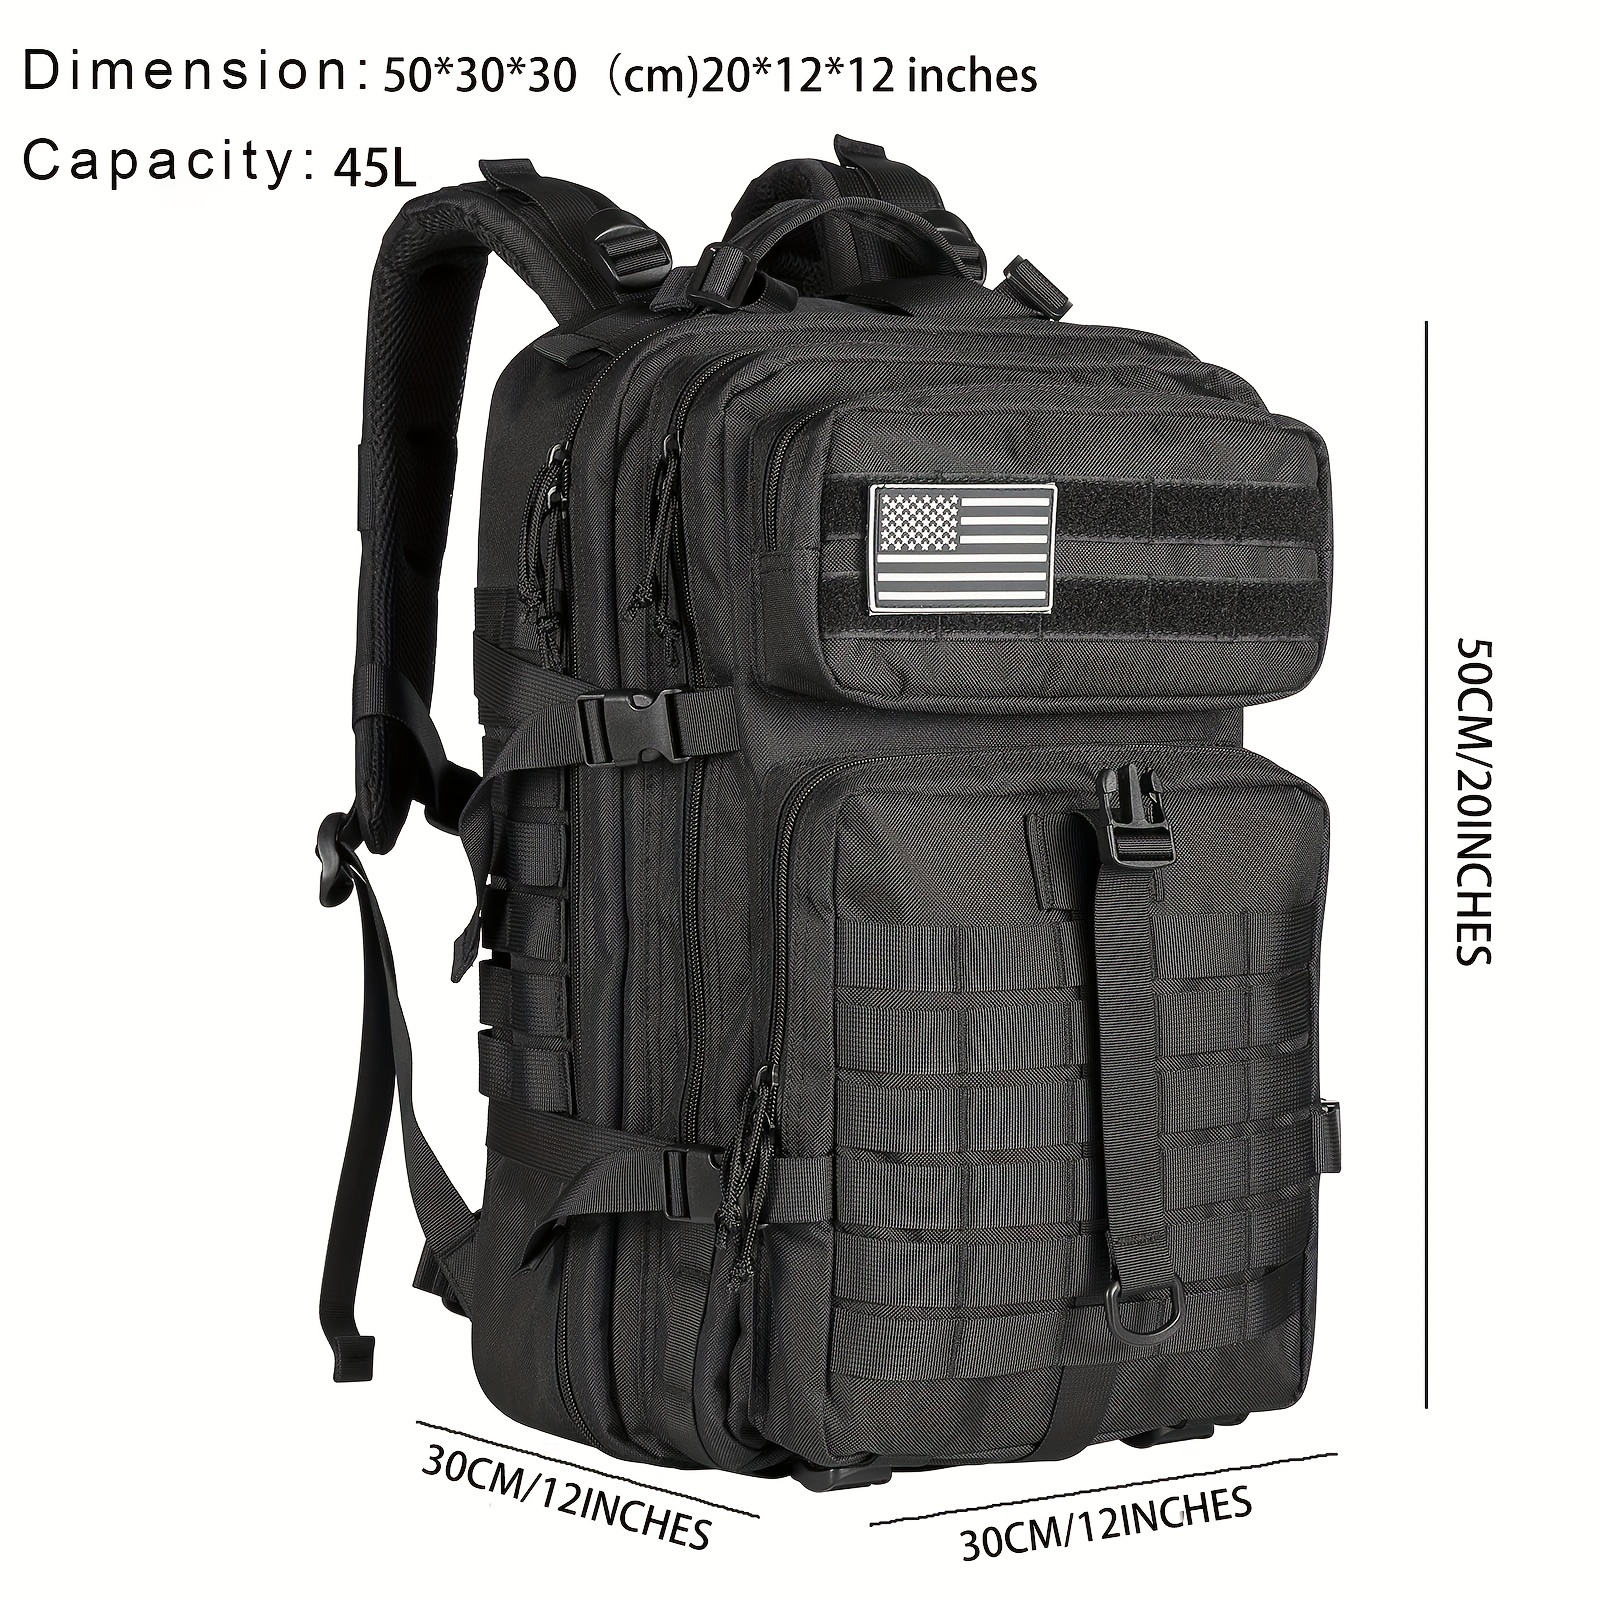 DHS Tactical Backpack with 2 Patches